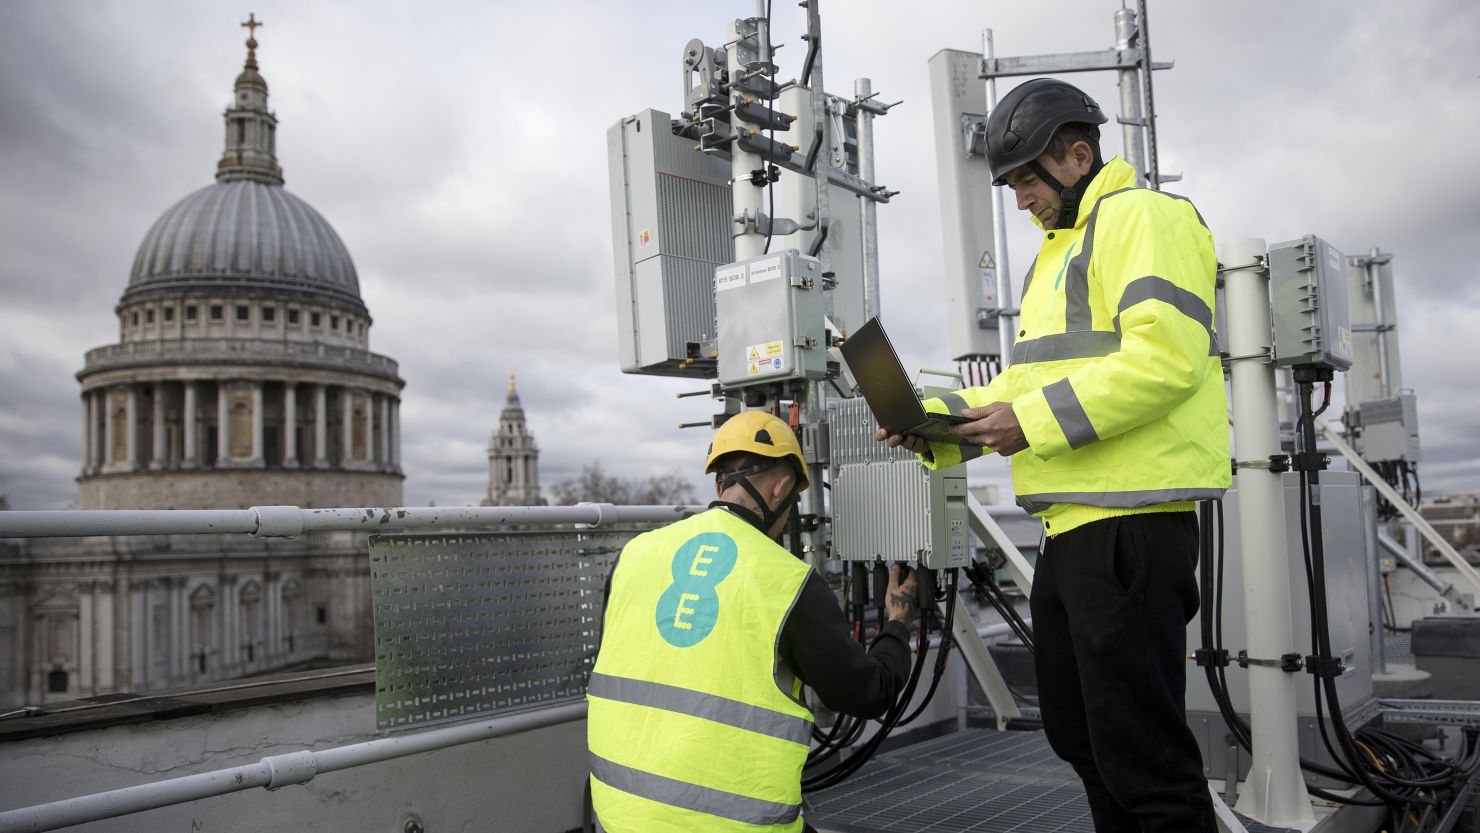 Engineers from EE the wireless network provider owned by BT Group Plc, inspect Huawei Technologies Co. 5G equipment overlooking St. Paul's Cathedral during trials in the City of London, U.K., on Friday, March 15, 2019. Photographer: Simon Dawson/Bloomberg via Getty Images